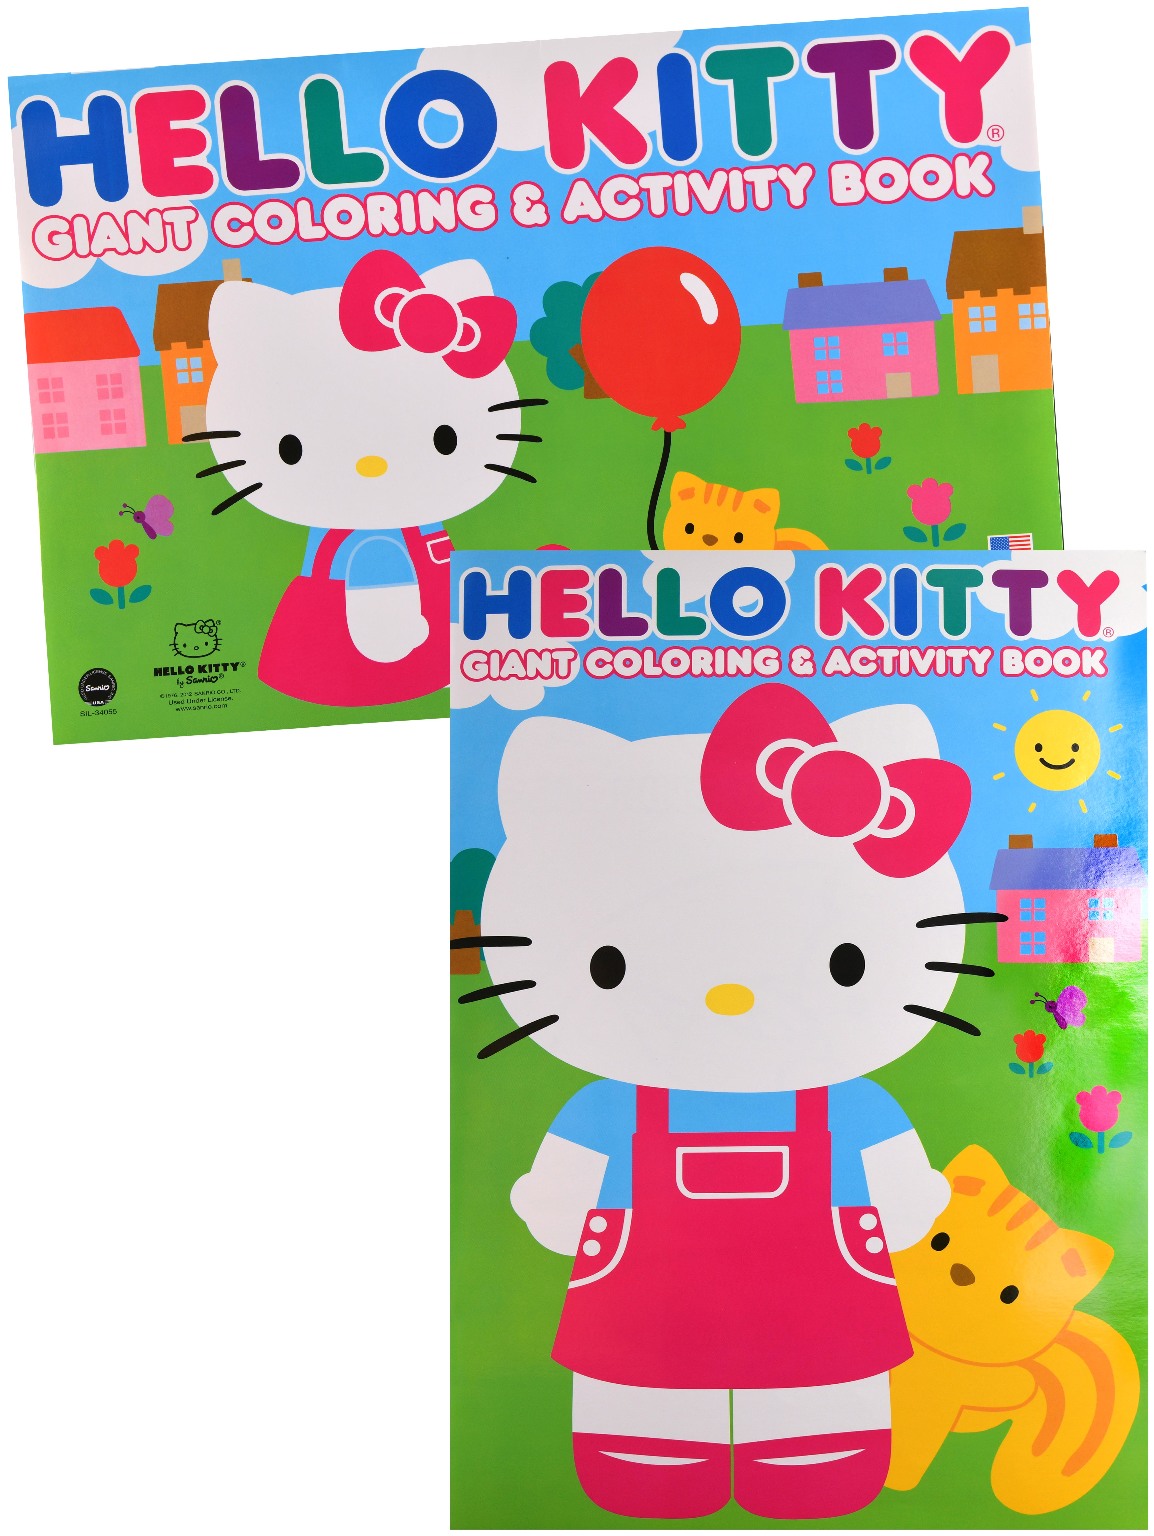 Wholesale Hello Kitty Giant Coloring Activity Book - 11" x 16" (SKU